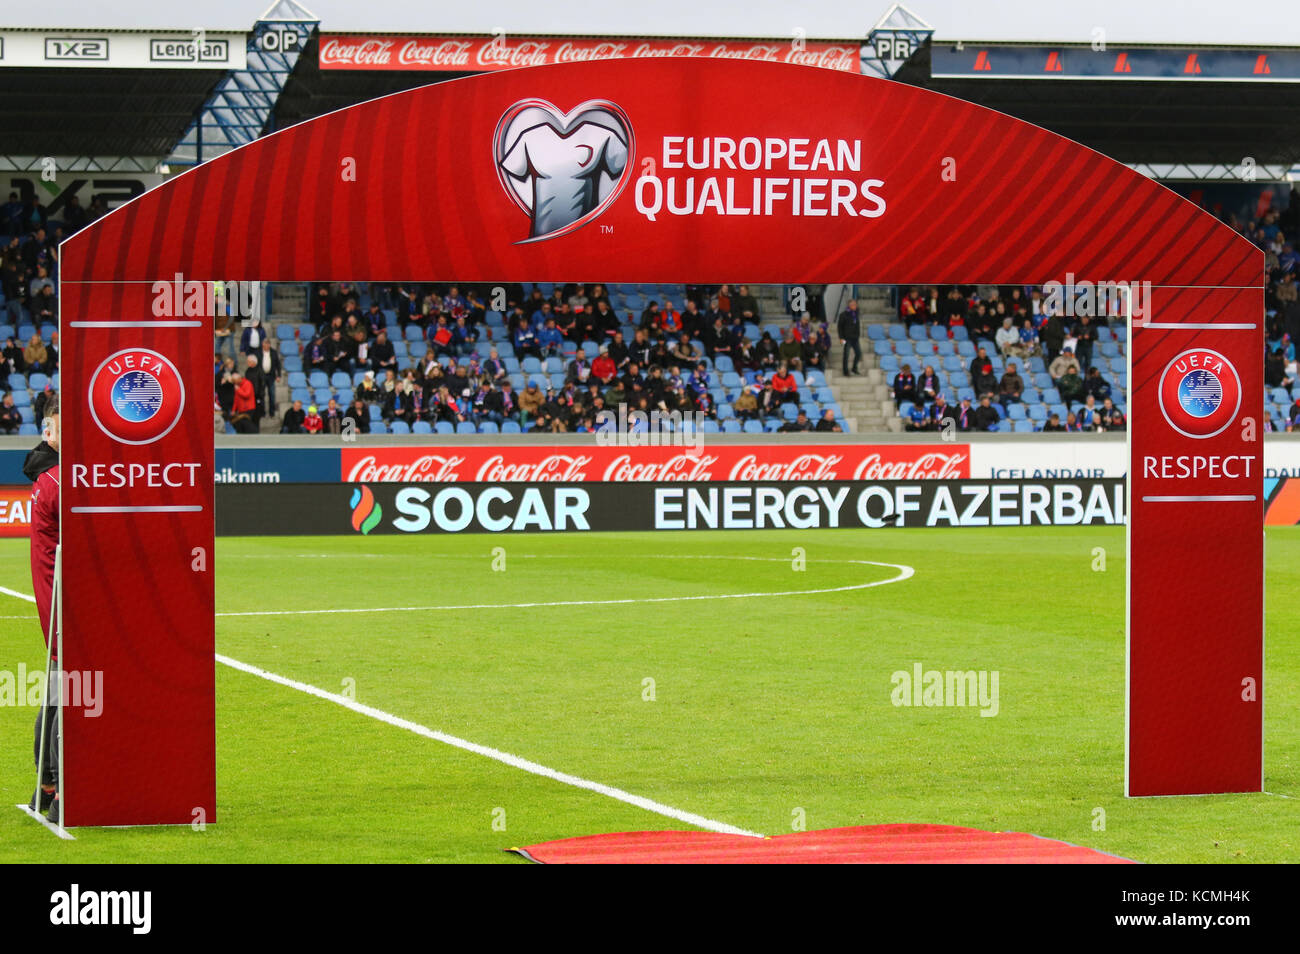 REYKJAVIK, ICELAND - SEPTEMBER 5, 2017: Official Brand wall of FIFA World Cup 2018 Qualifying matches on the pitch of Laugardalsvollur stadium in Reyk Stock Photo